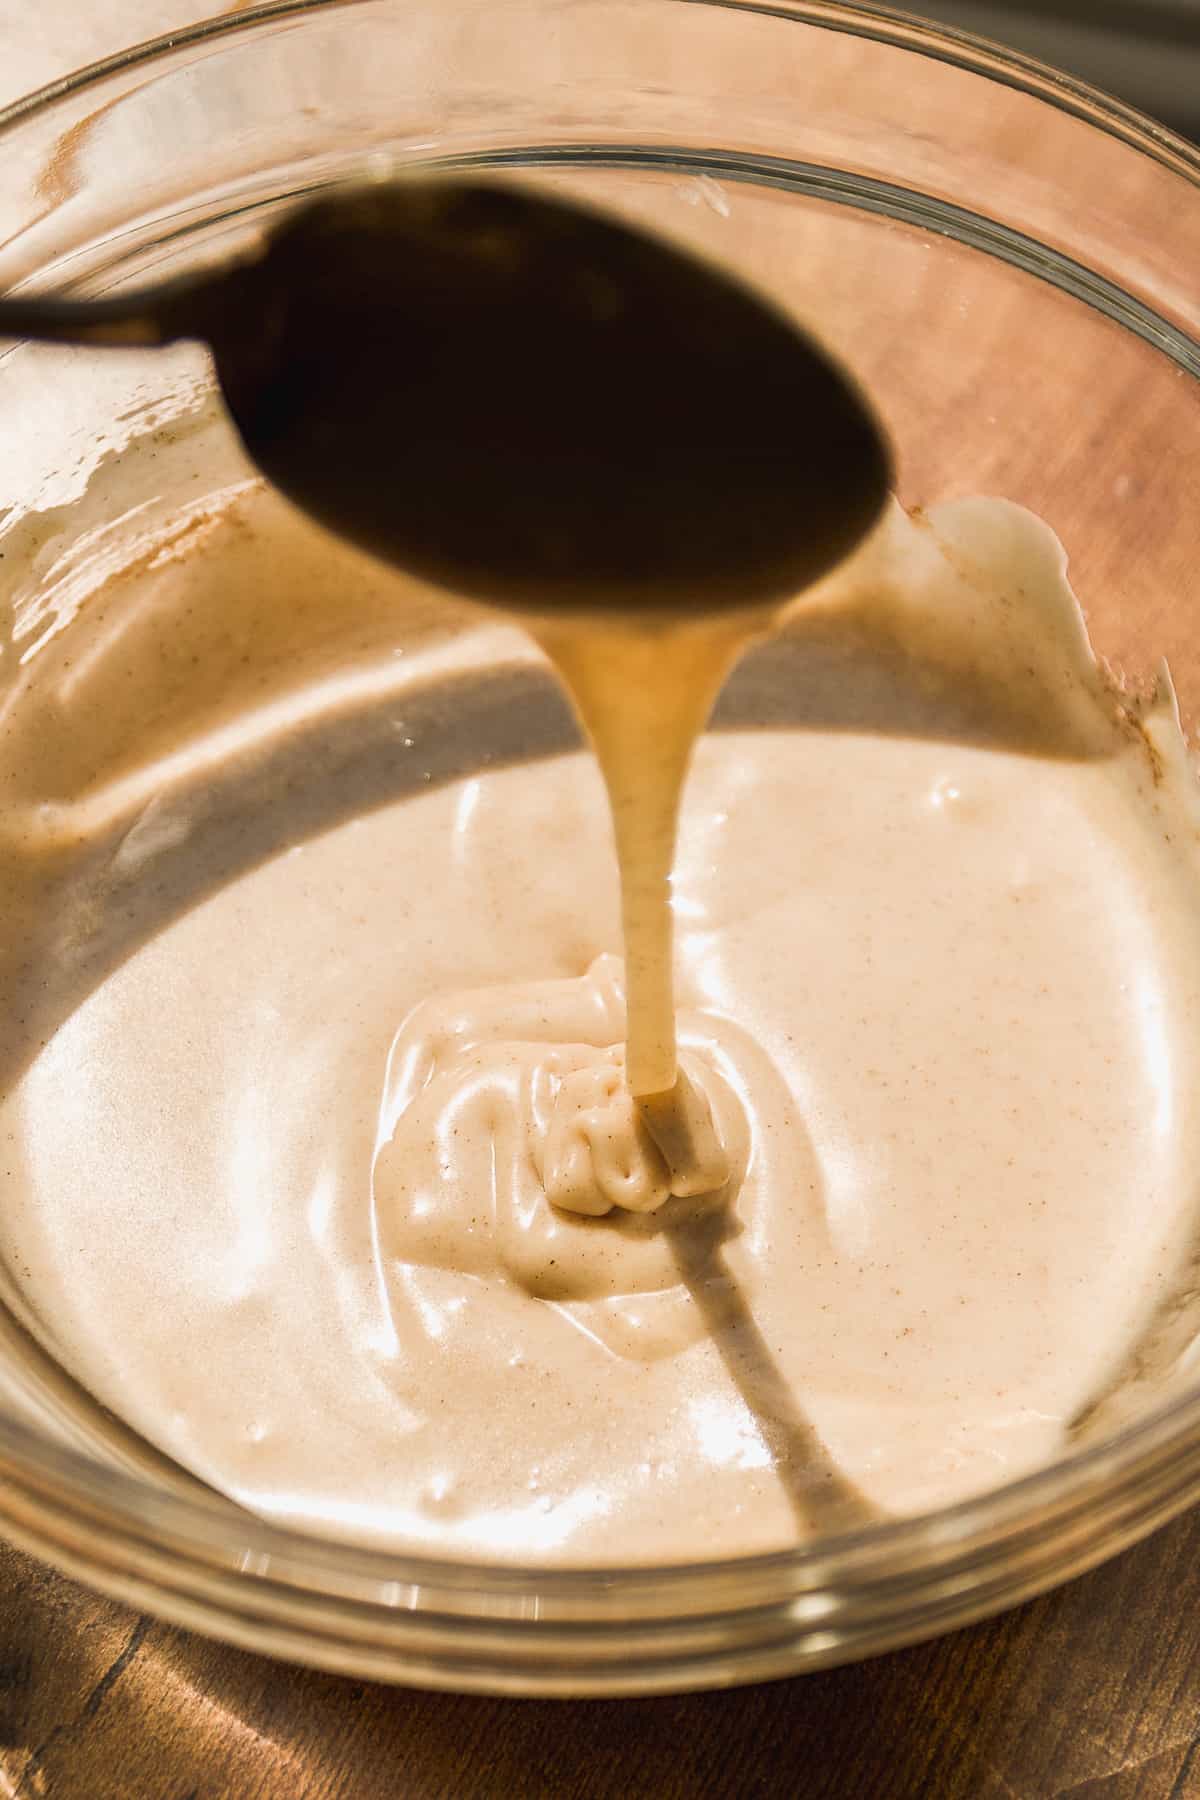 Cinnamon cream cheese icing in a glass bowl.